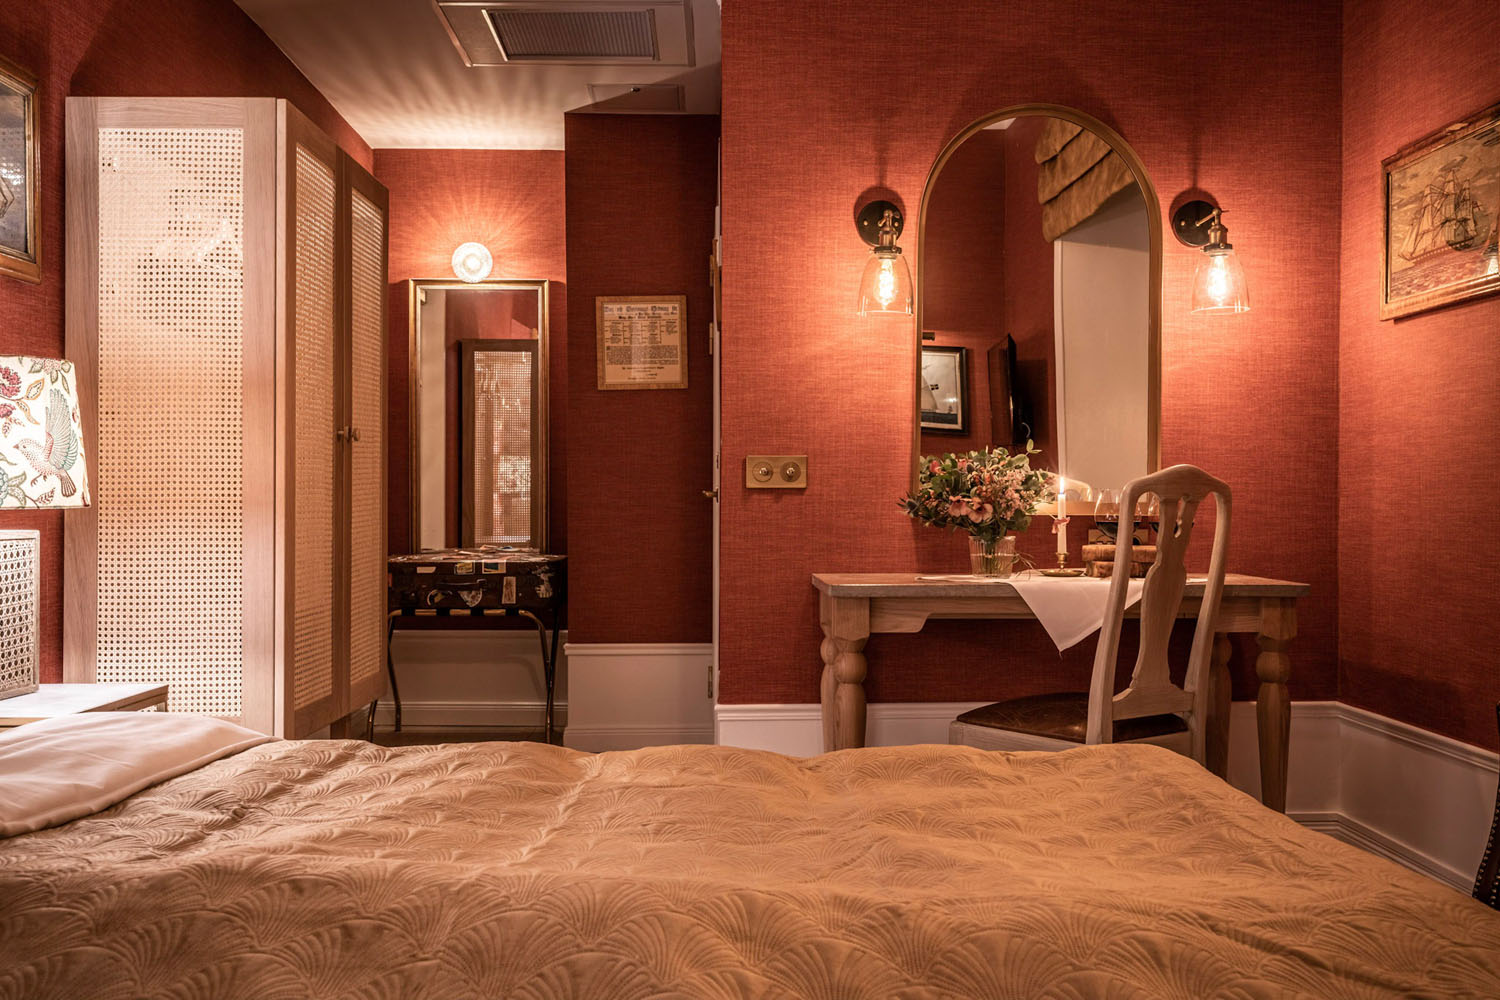 Image from Victory Hotel – Gamla Stan, Stockholm, Sweden